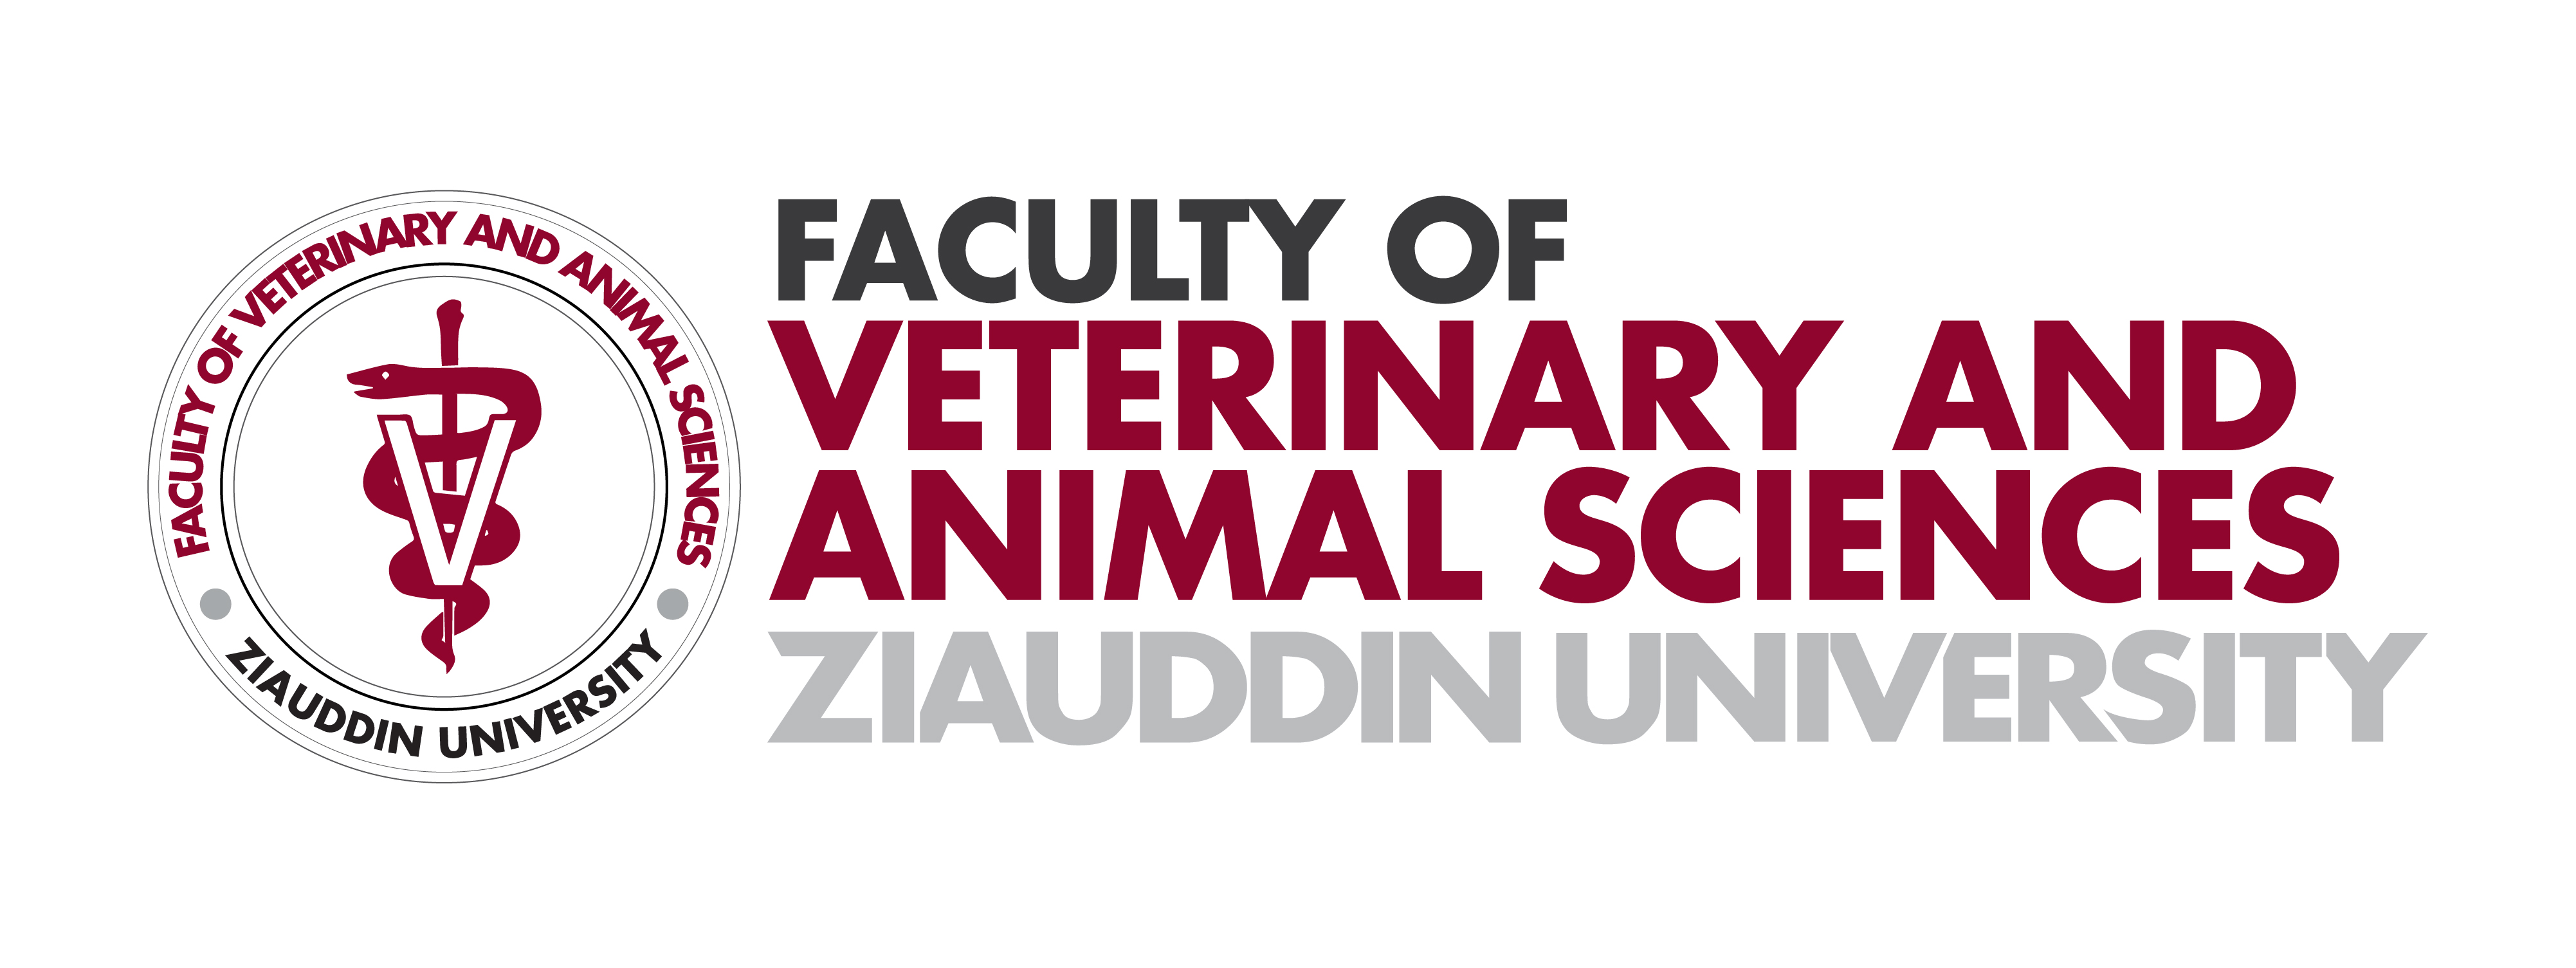 Faculty of Veterinary and Animal Sciences